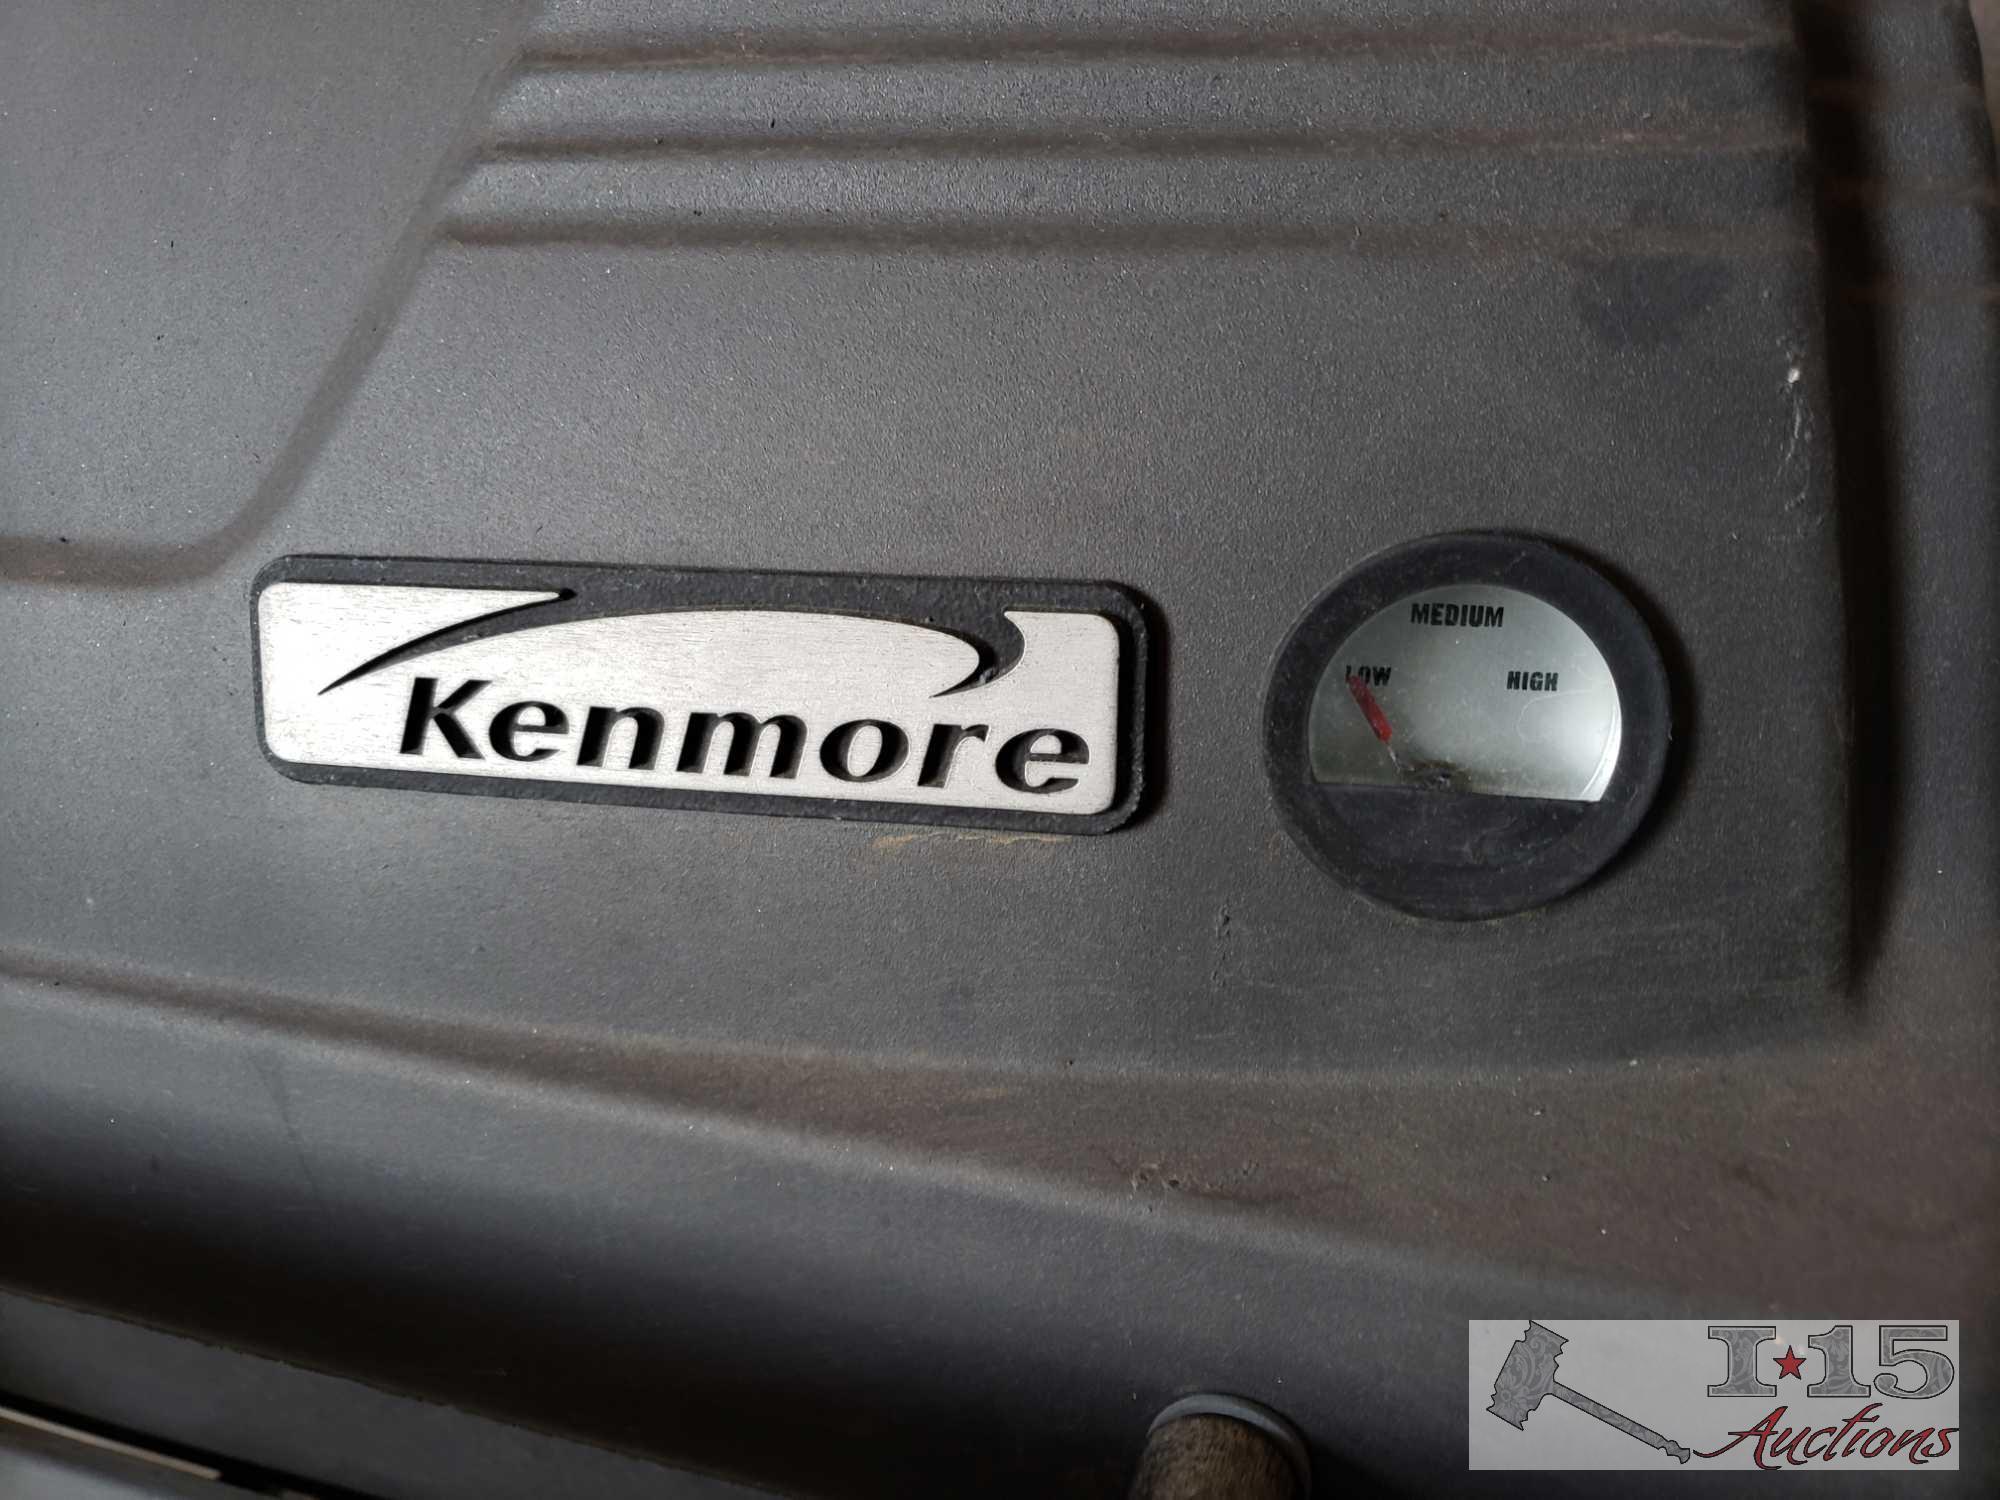 Kenmore Master Flame Grill with Side Burner